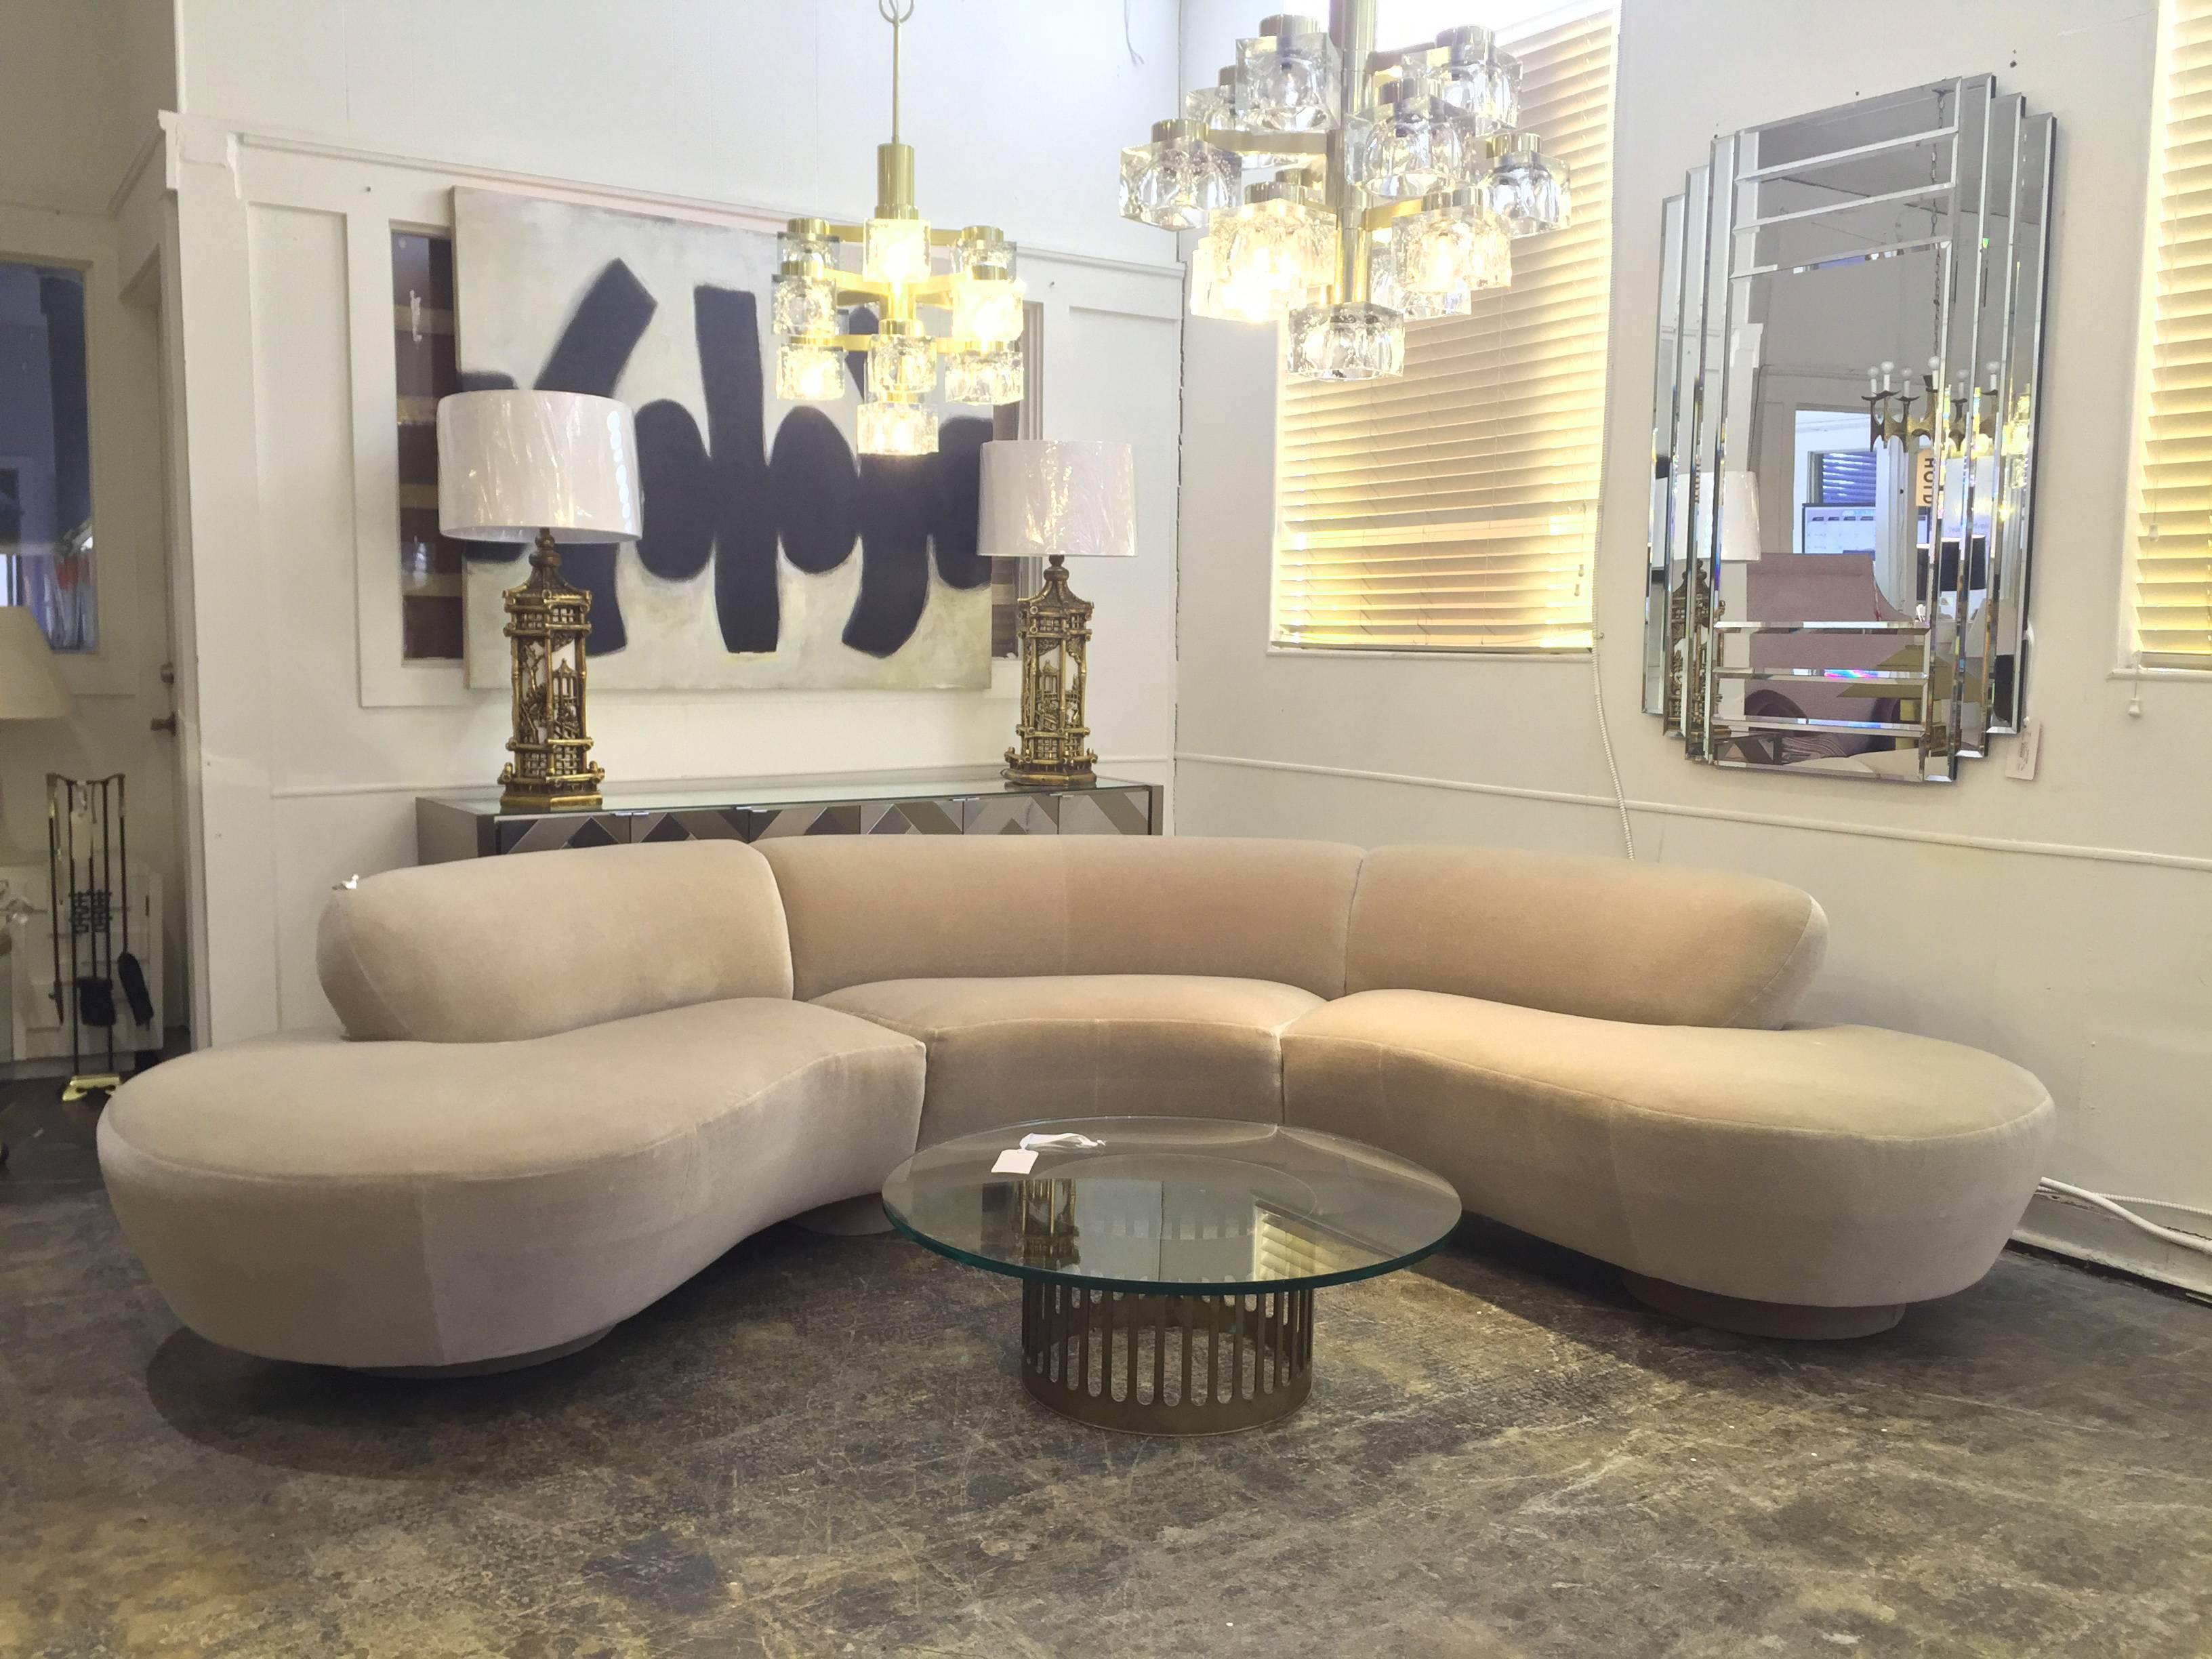 Vladimir Kagan serpentine cloud sectional sofa in oyster mohair. Sofa is in excellent vintage condition.

Dimensions: 122